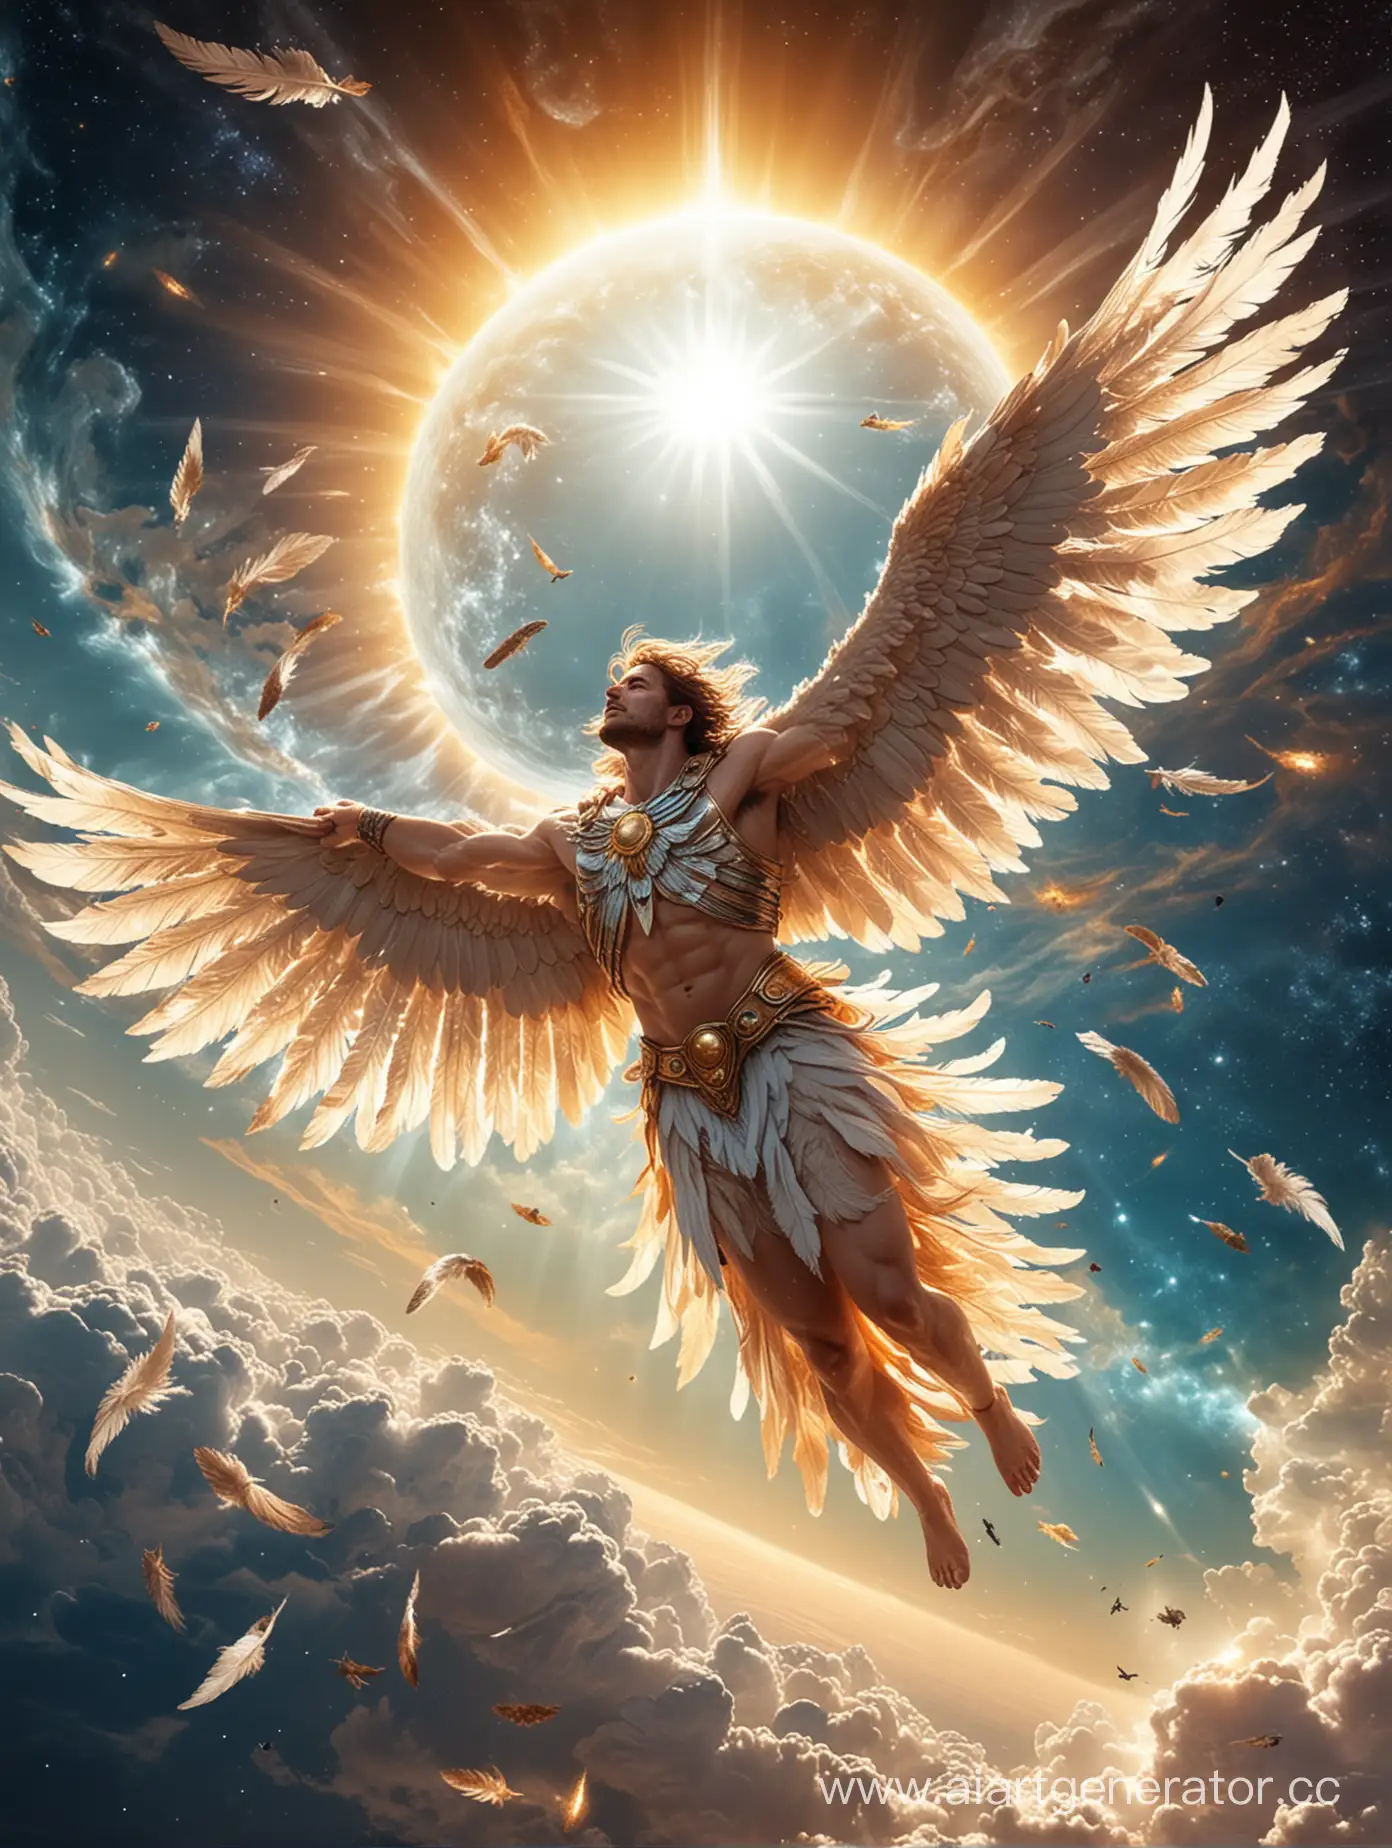 Icarus-Flying-Towards-the-Sun-with-Majestic-Feathered-Wings-in-Space